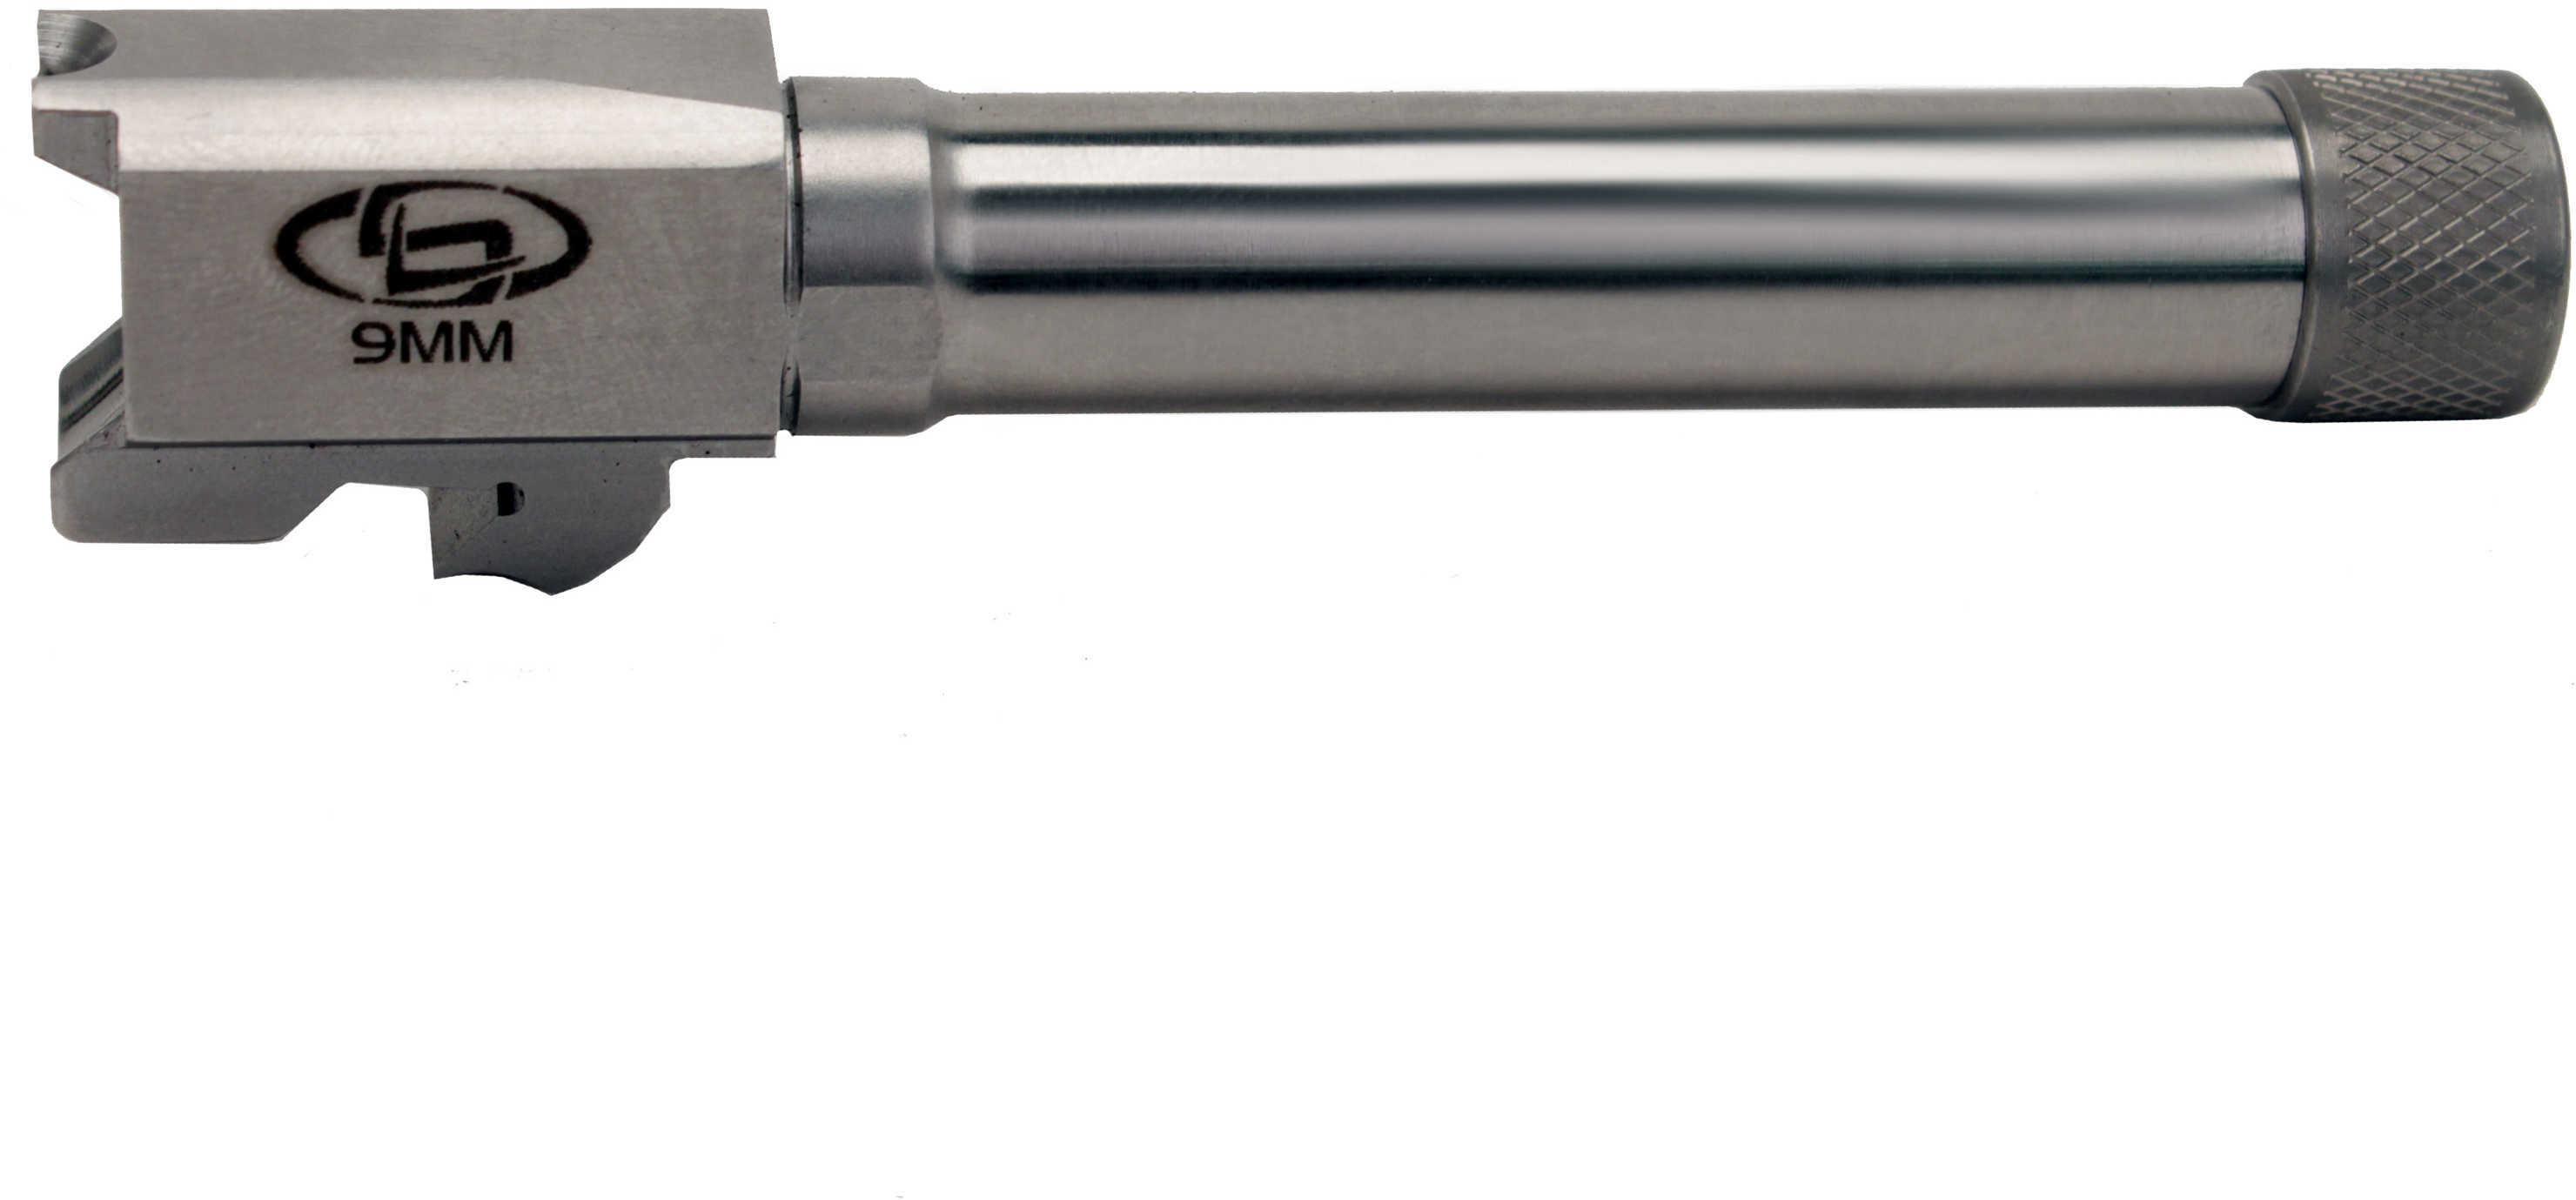 StormLake Barrels Lake 9MM 4.28" Fits Smith & Wesson Compact Stainless Finish 1/2-28 Thread with 34141